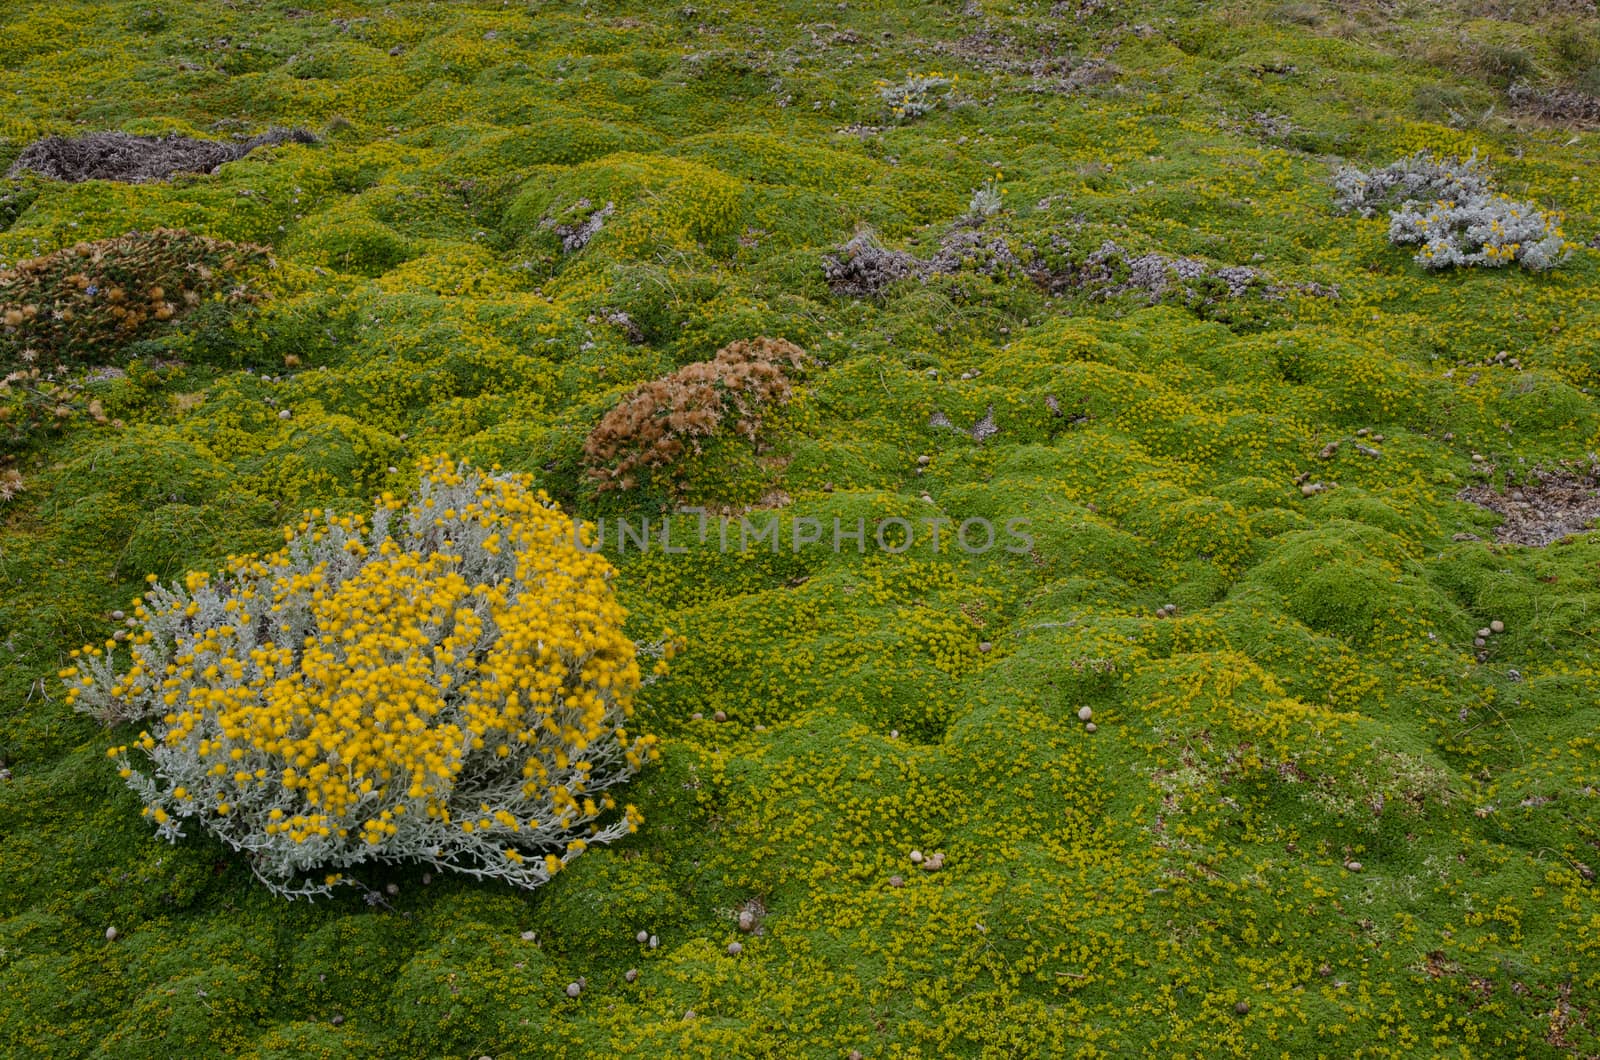 Plant of Senecio sp. in flowering and ground covered by vegetation. Otway Sound and Penguin Reserve. Magallanes Province. Magallanes and Chilean Antarctic Region. Chile.